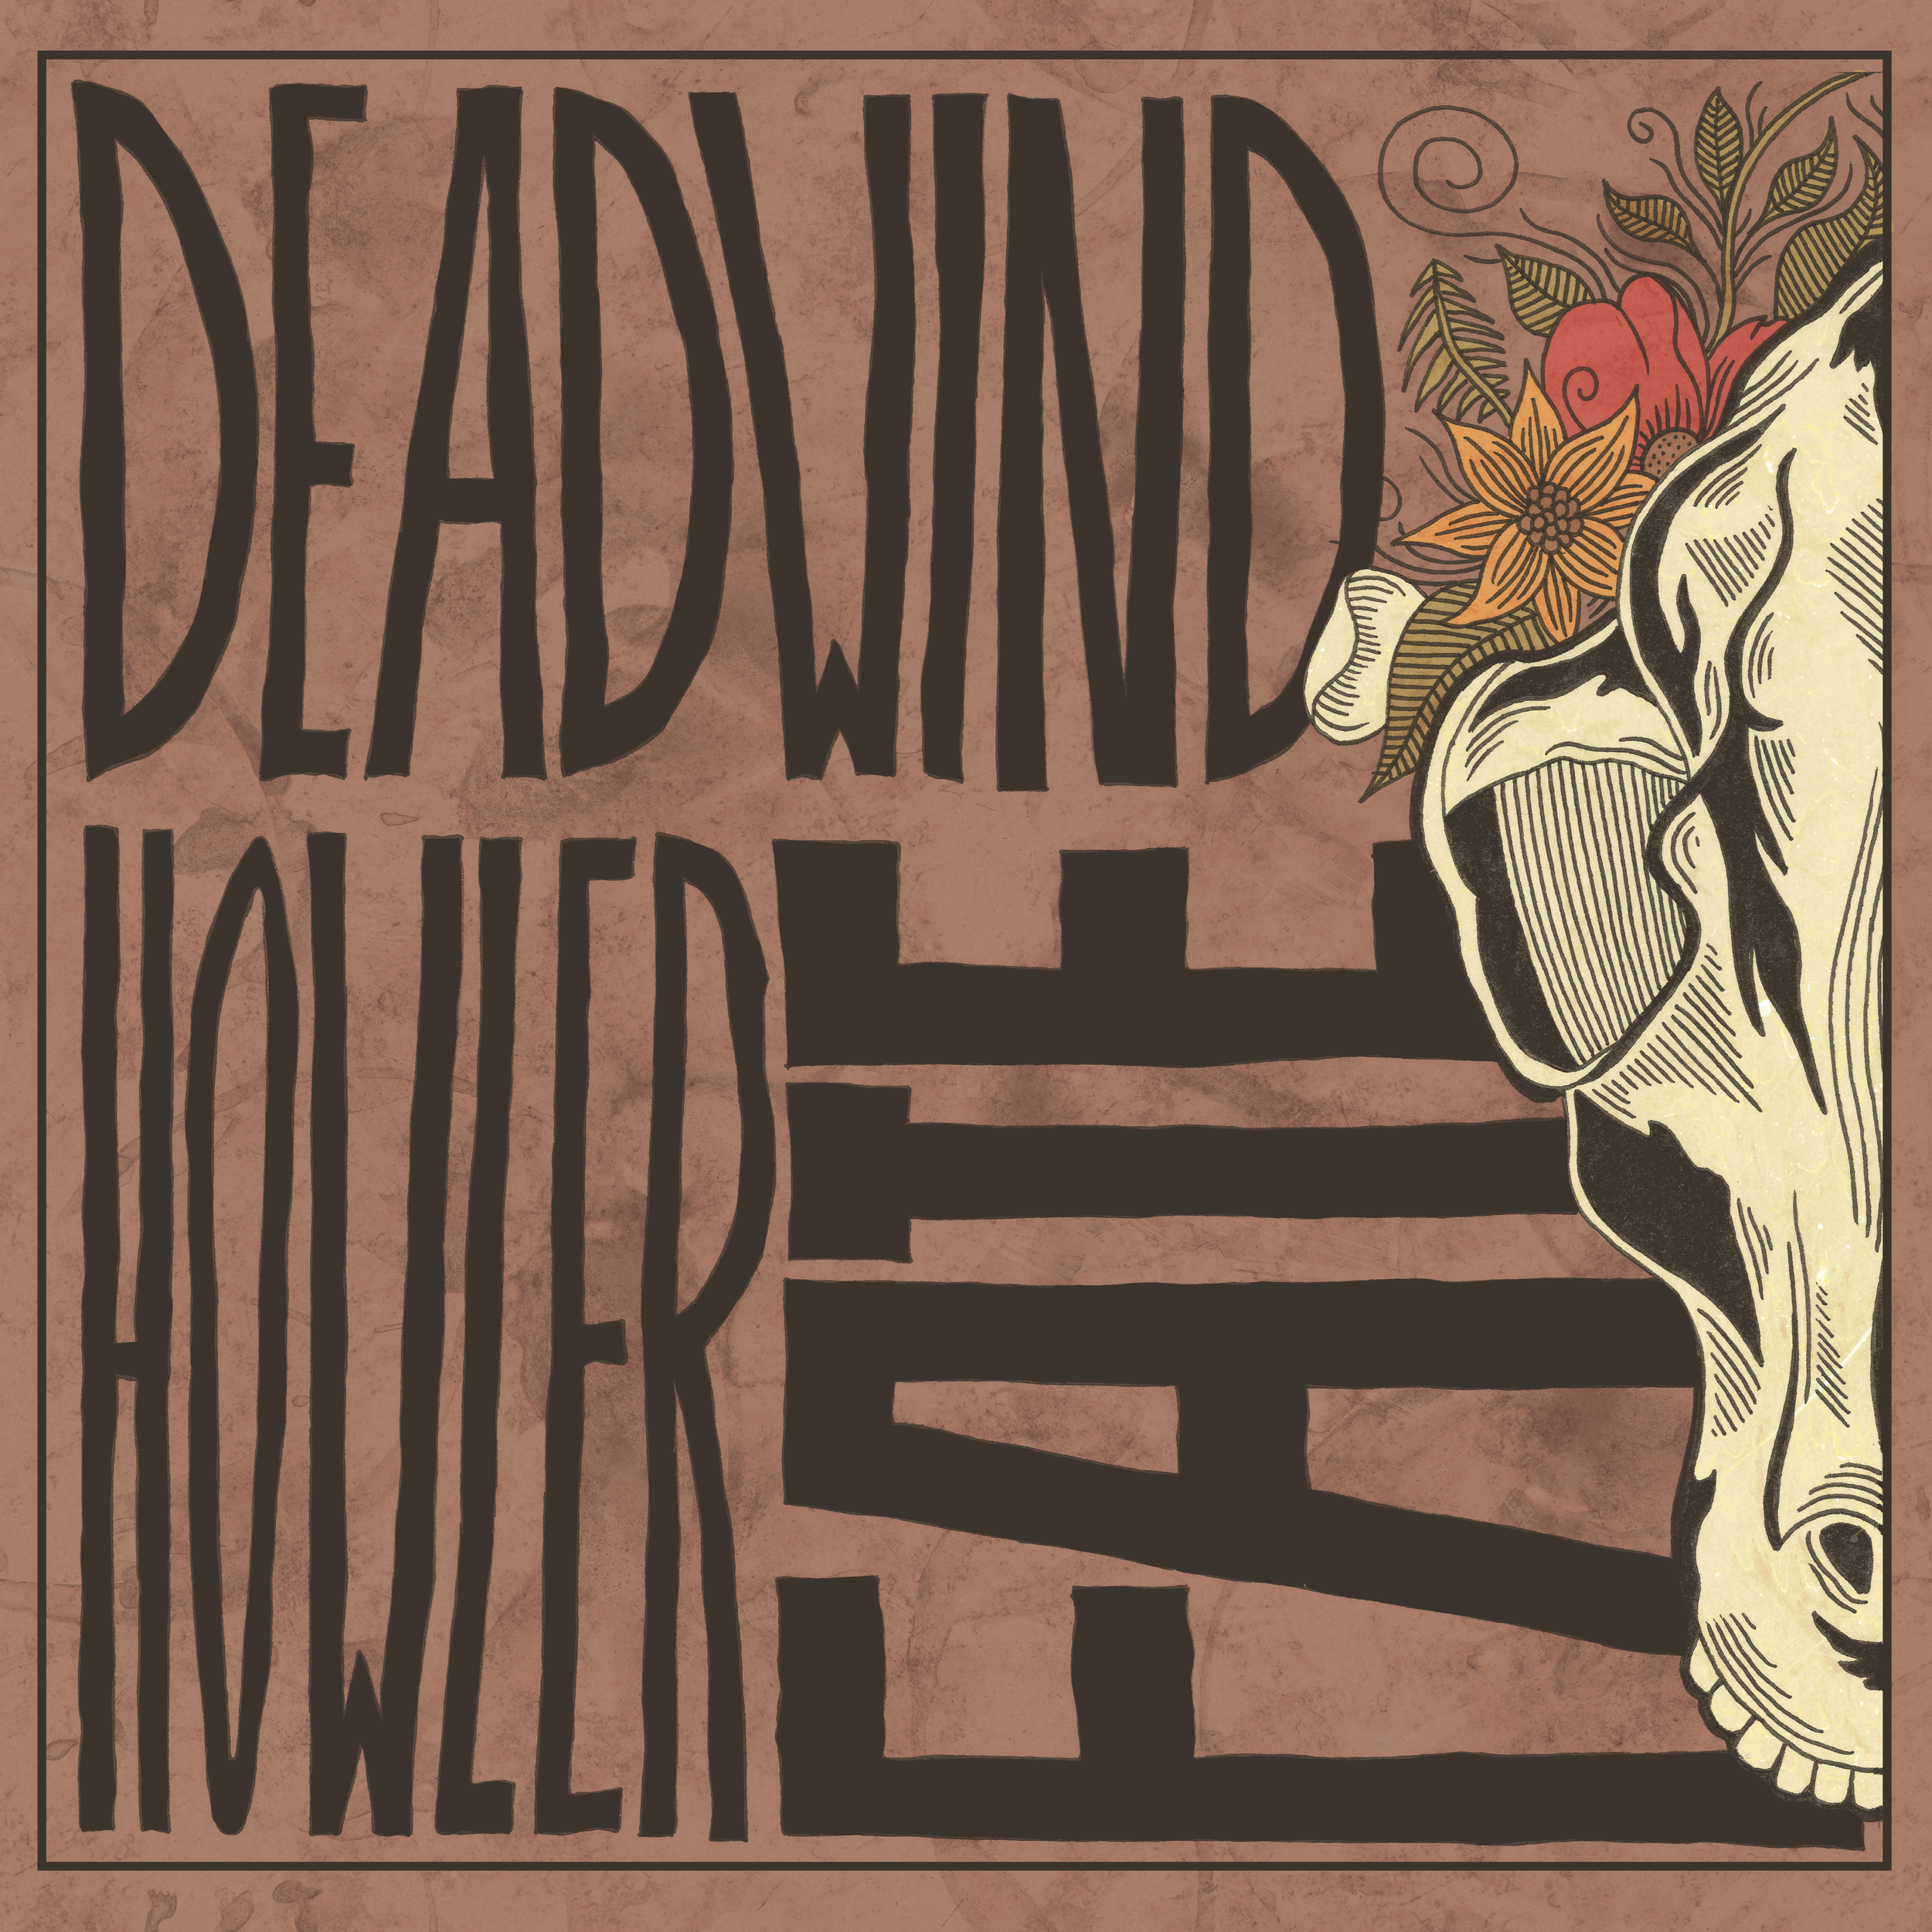 Deadwind Howler "Fate" EP Cover